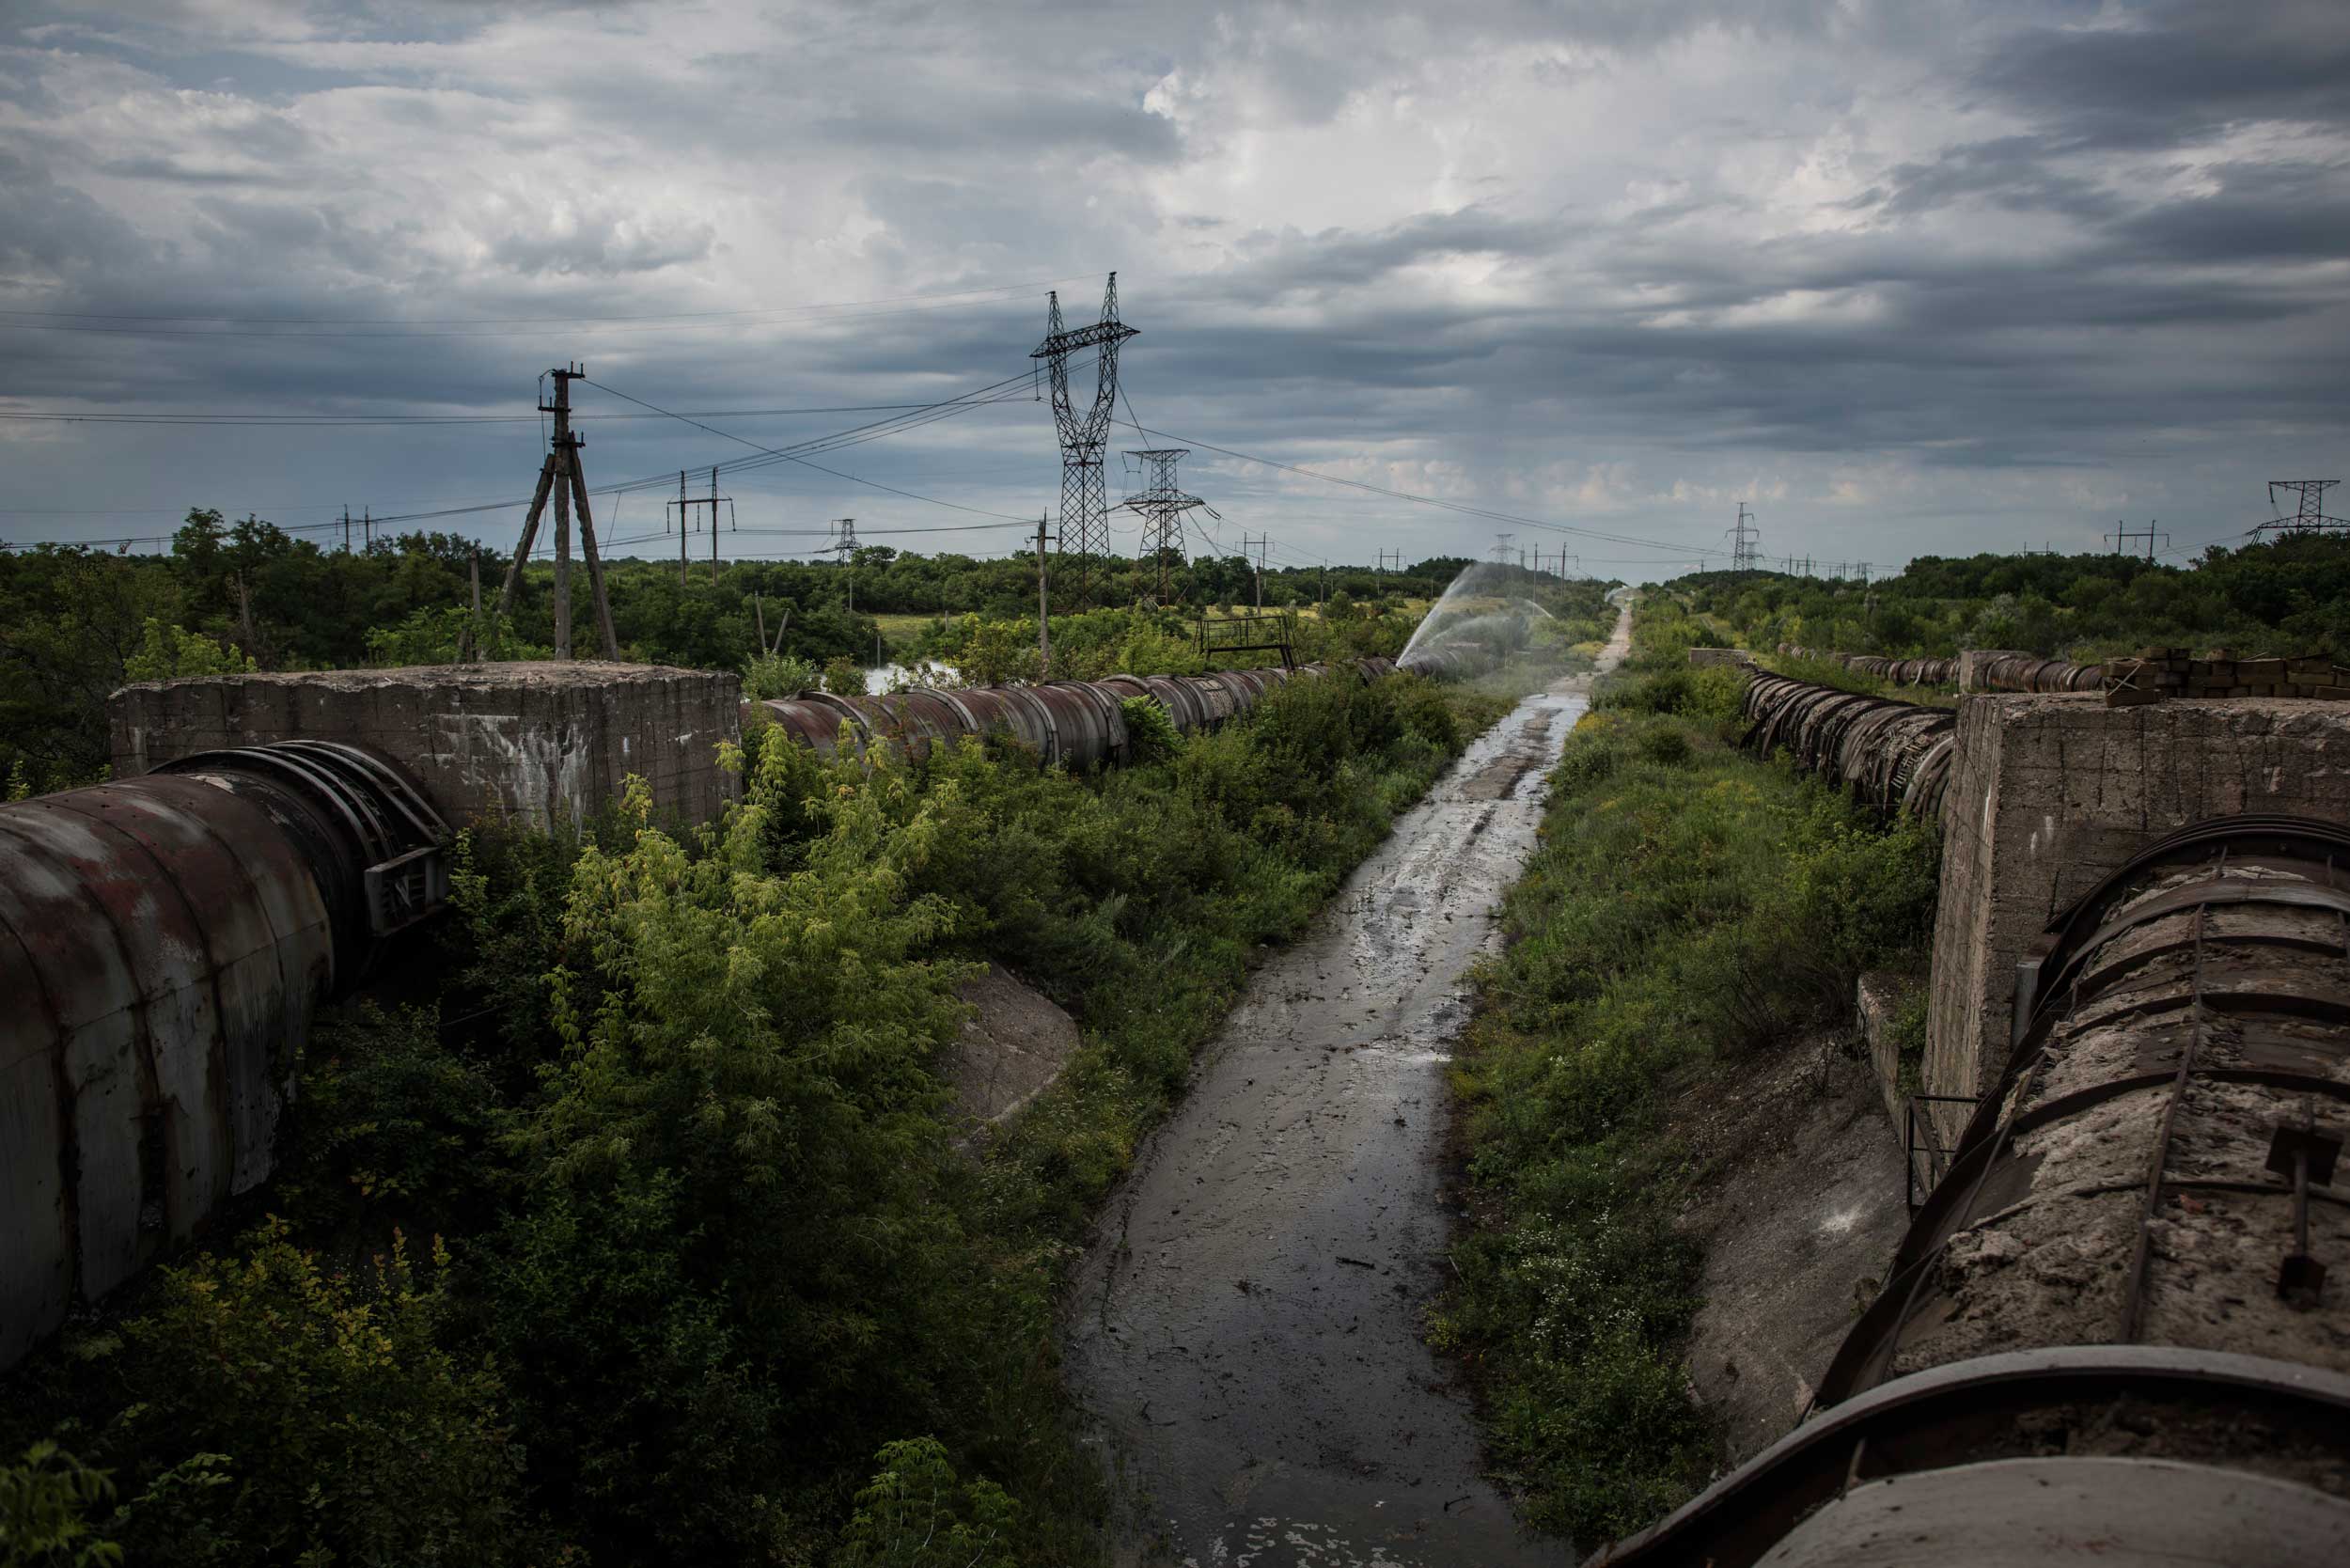 A damaged water pipeline that distributes water for the Donetsk region runs at the frontline between positions of Donetsk peoples republic and Ukrainian forces near Horlivka and Dzerzhinsk, Donetsk region, eastern Ukraine, July 5, 2015.